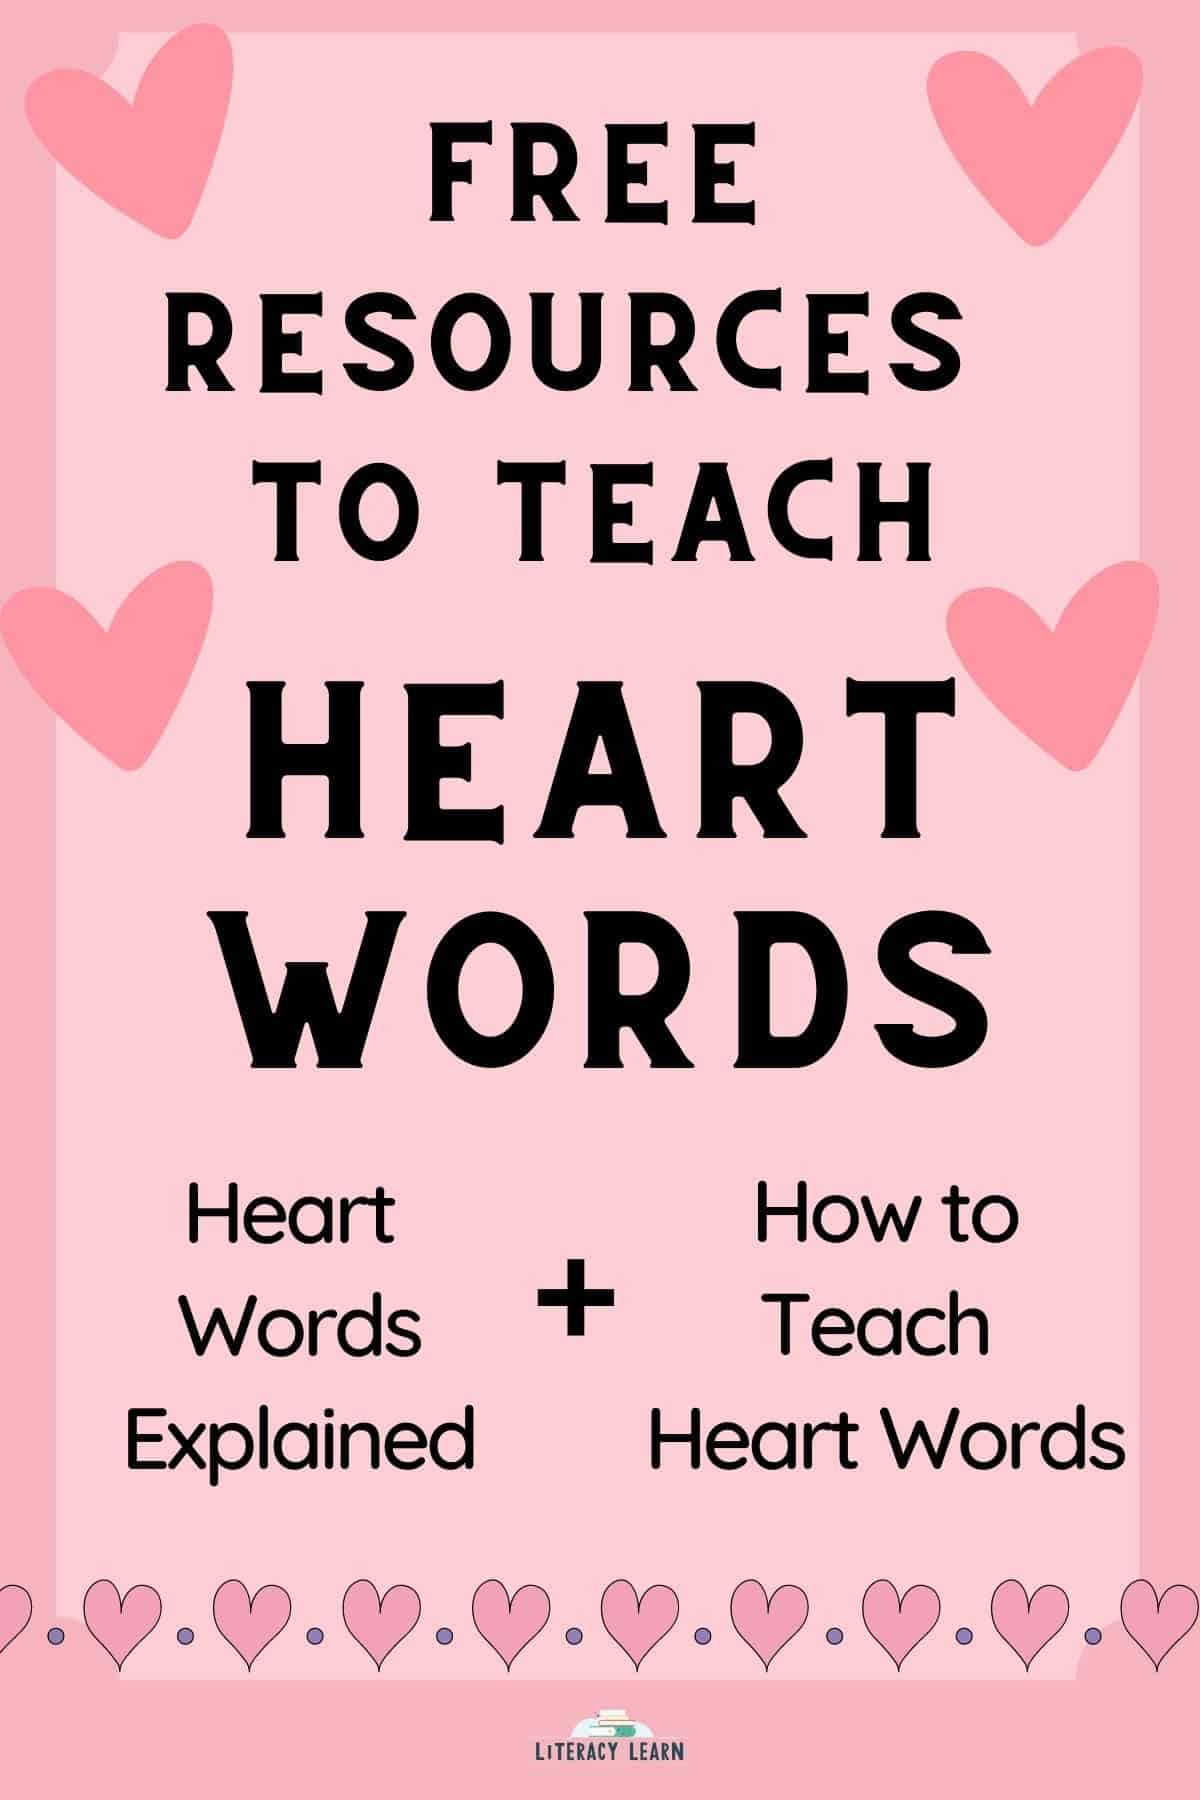 Pink Pinterest graphic with hearts that says "Free Resources To Teach Heart Words."